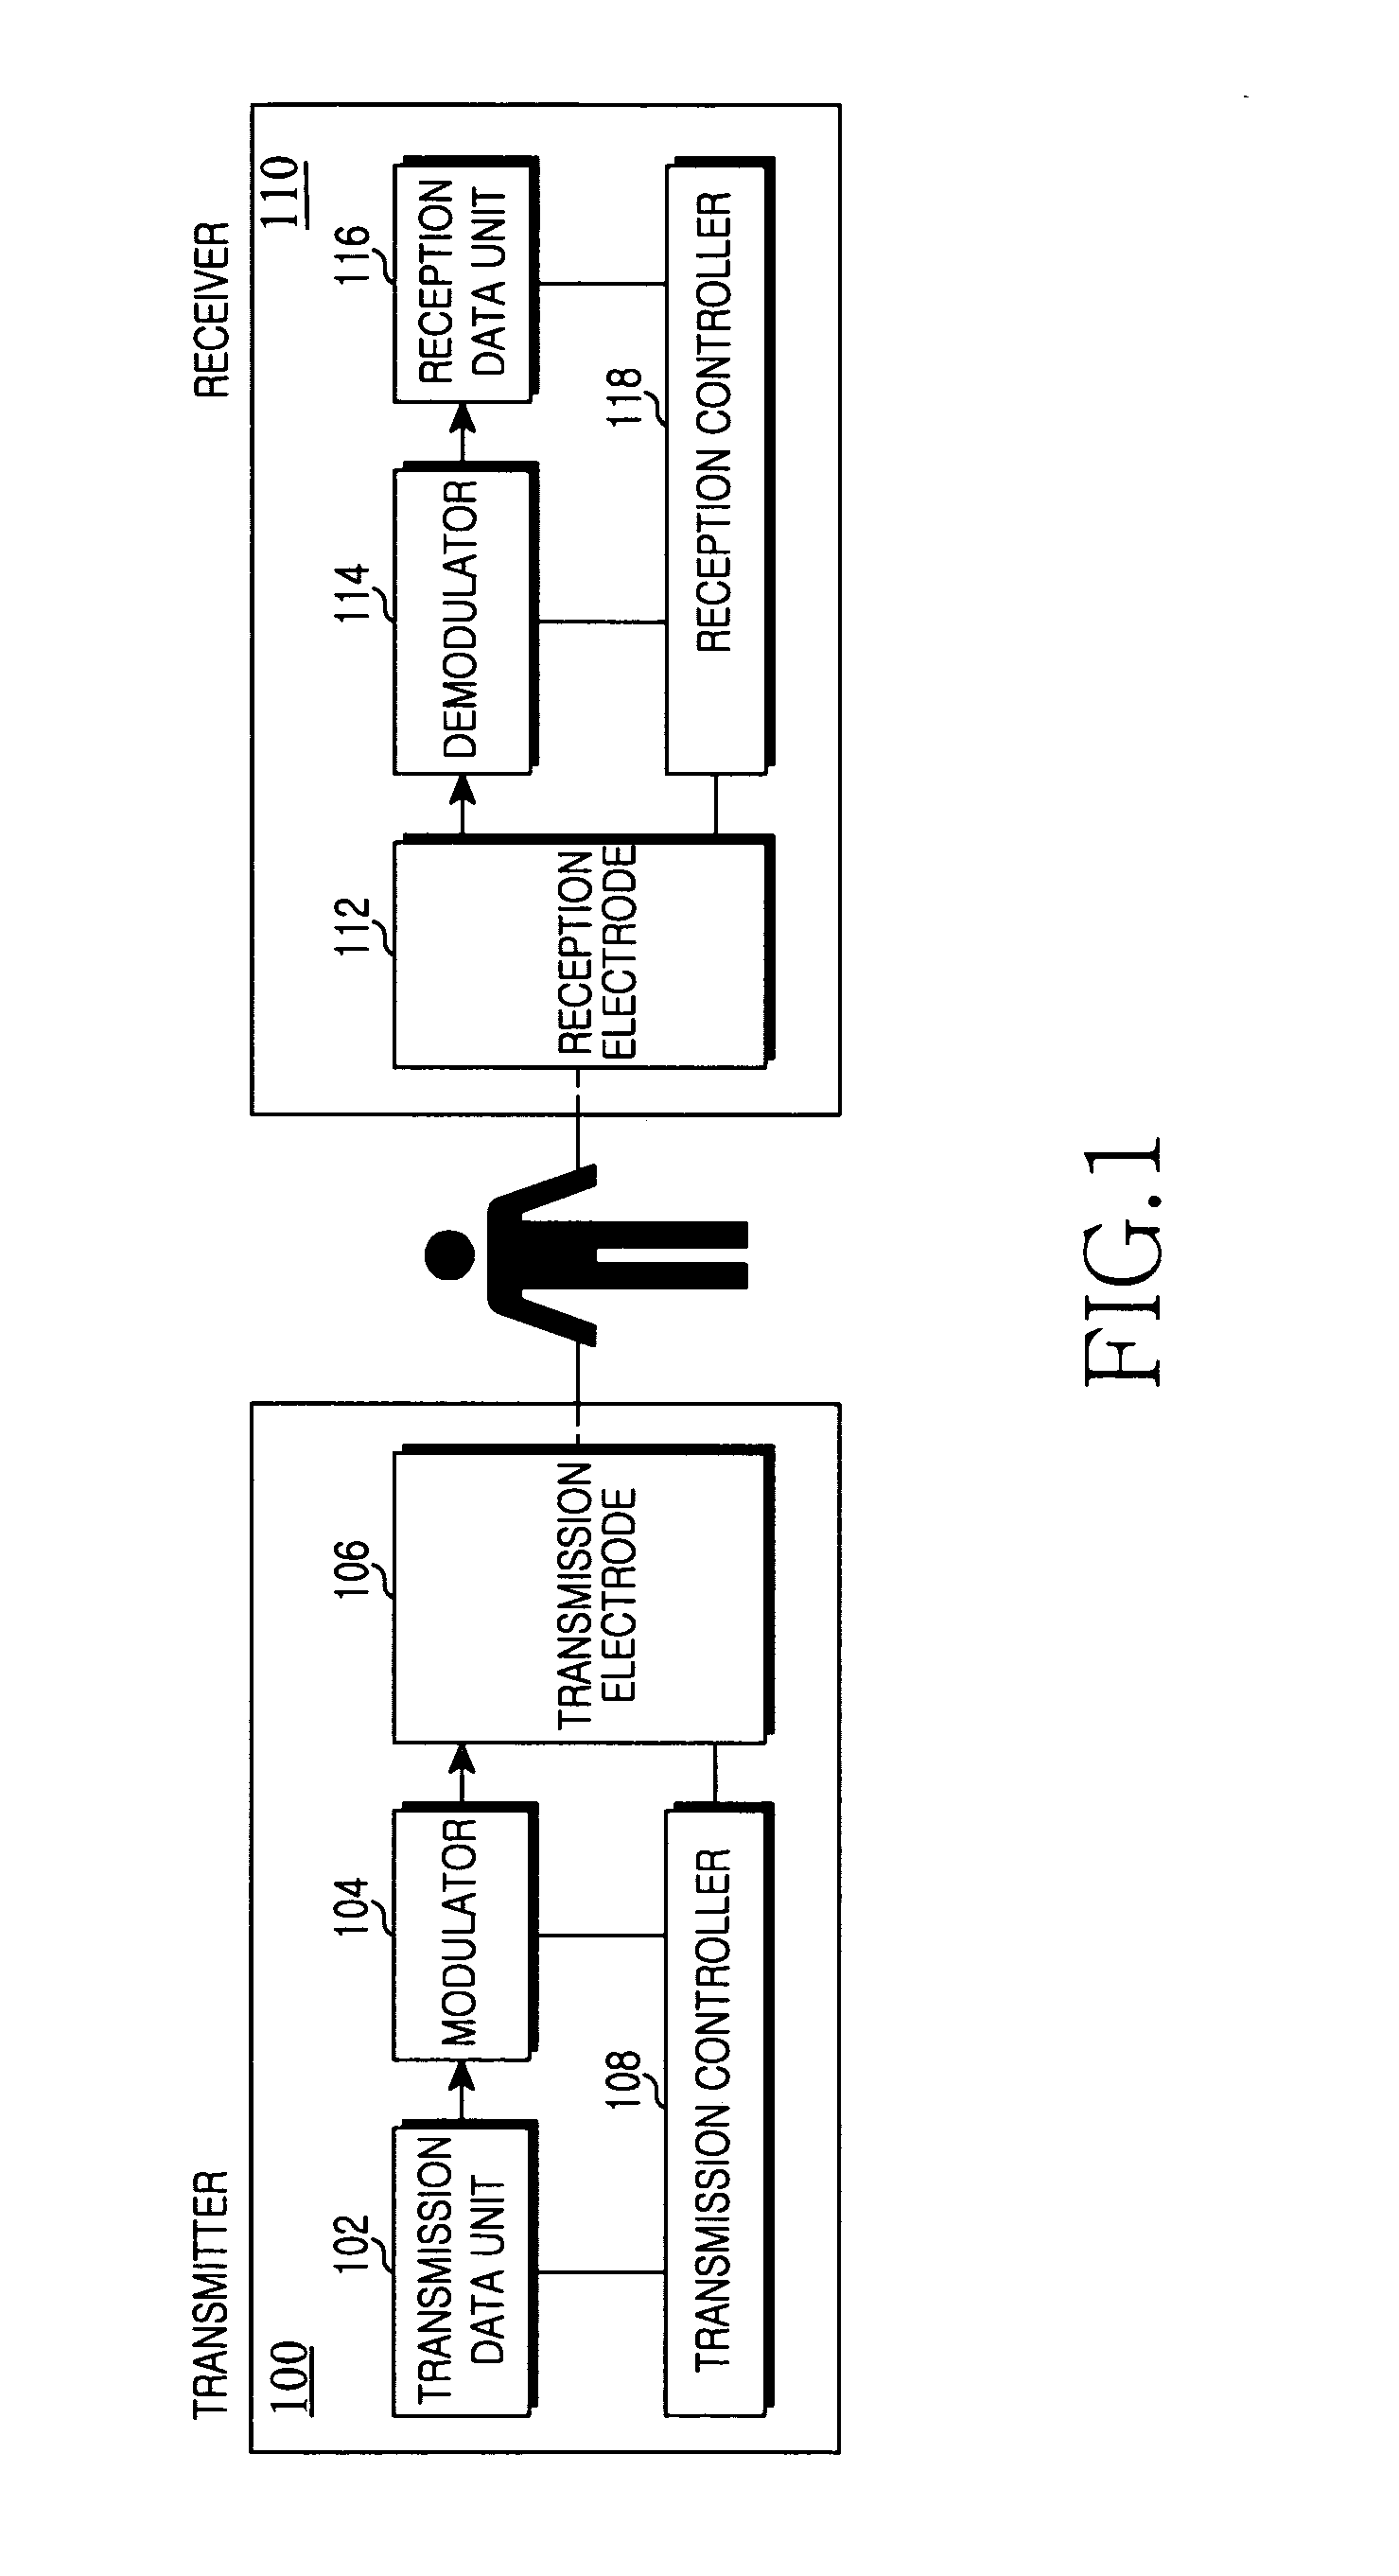 Apparatus and method for transmitting/receiving data in human body communication system